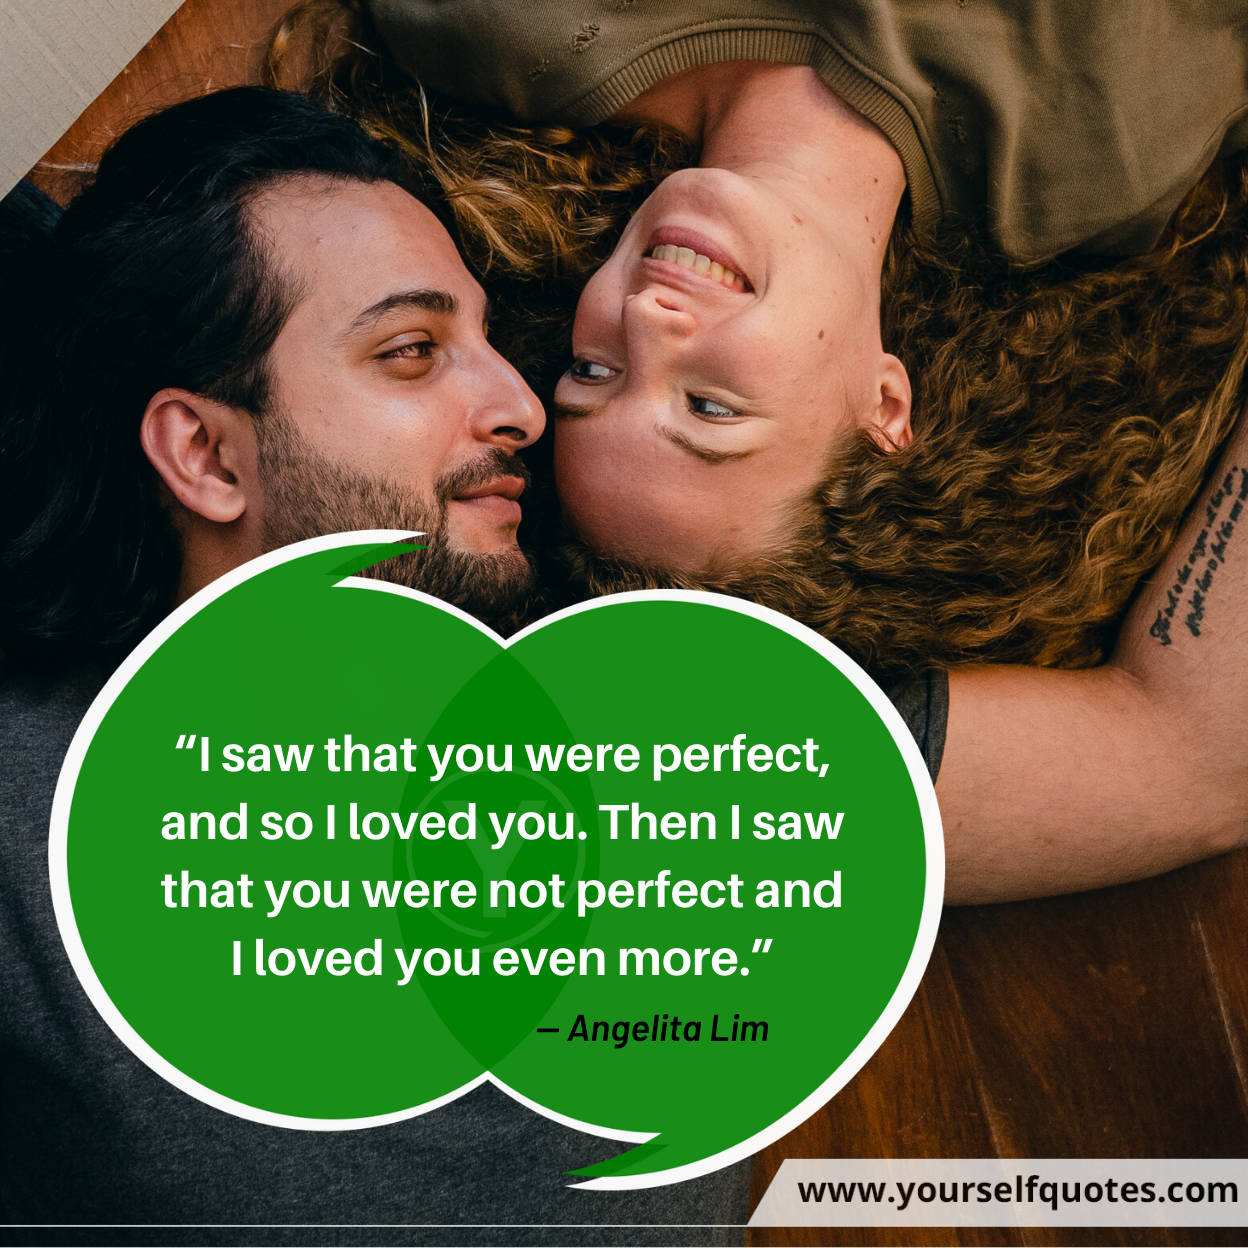 True Love Quotes That Are A Symbol Of Eternal Bond News Dome